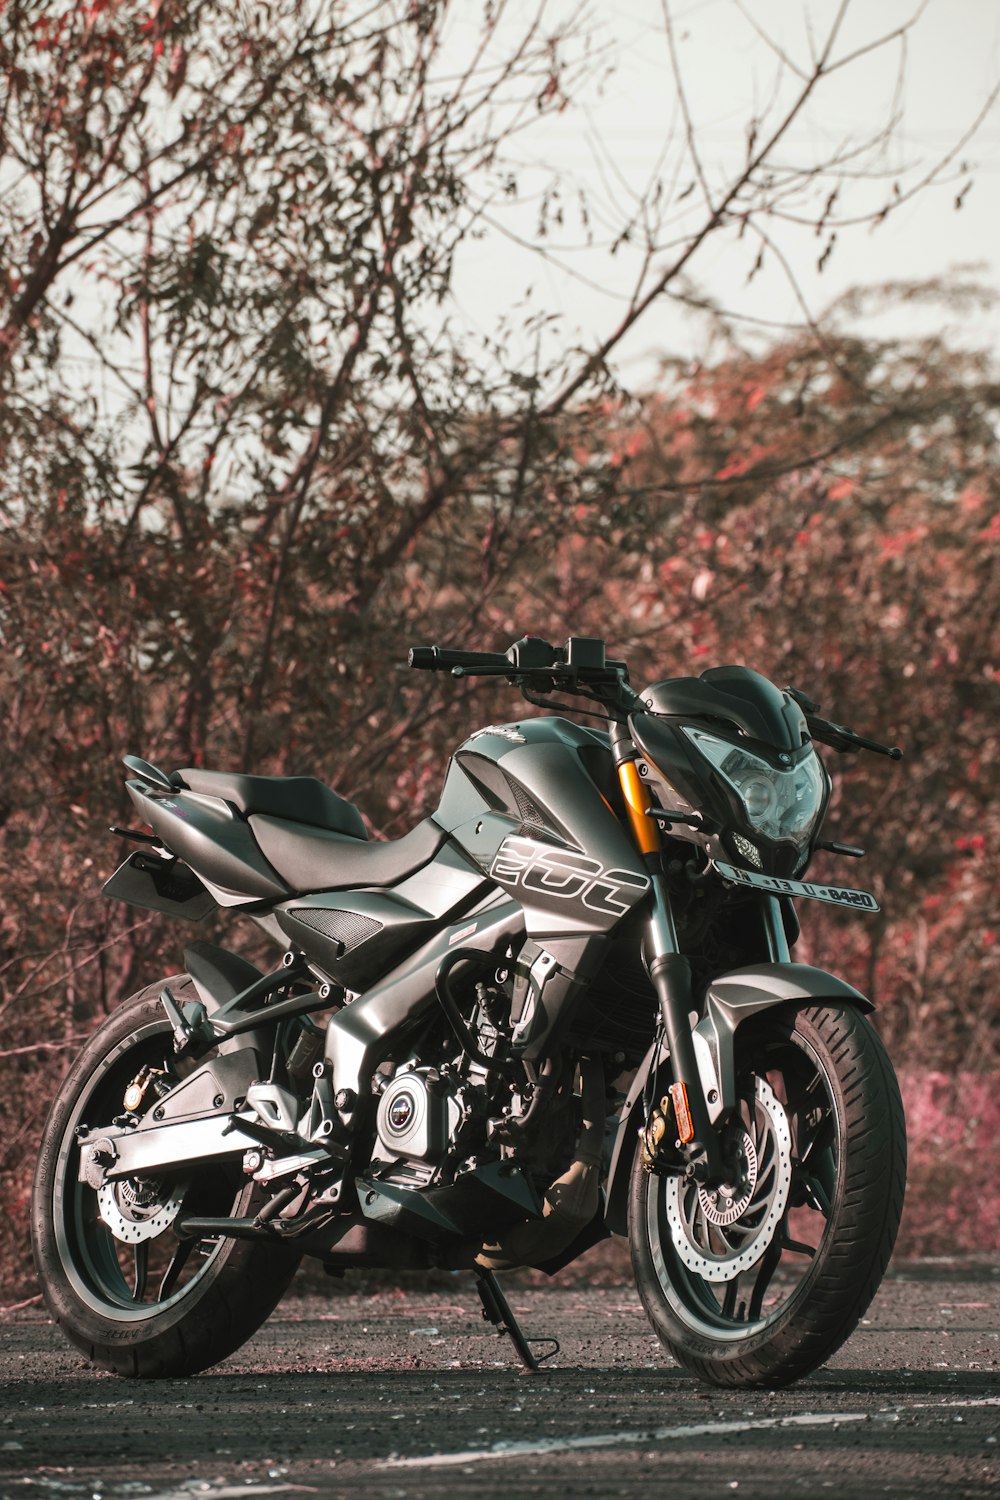 Honda Motorcycle Pictures Download Free Images On Unsplash